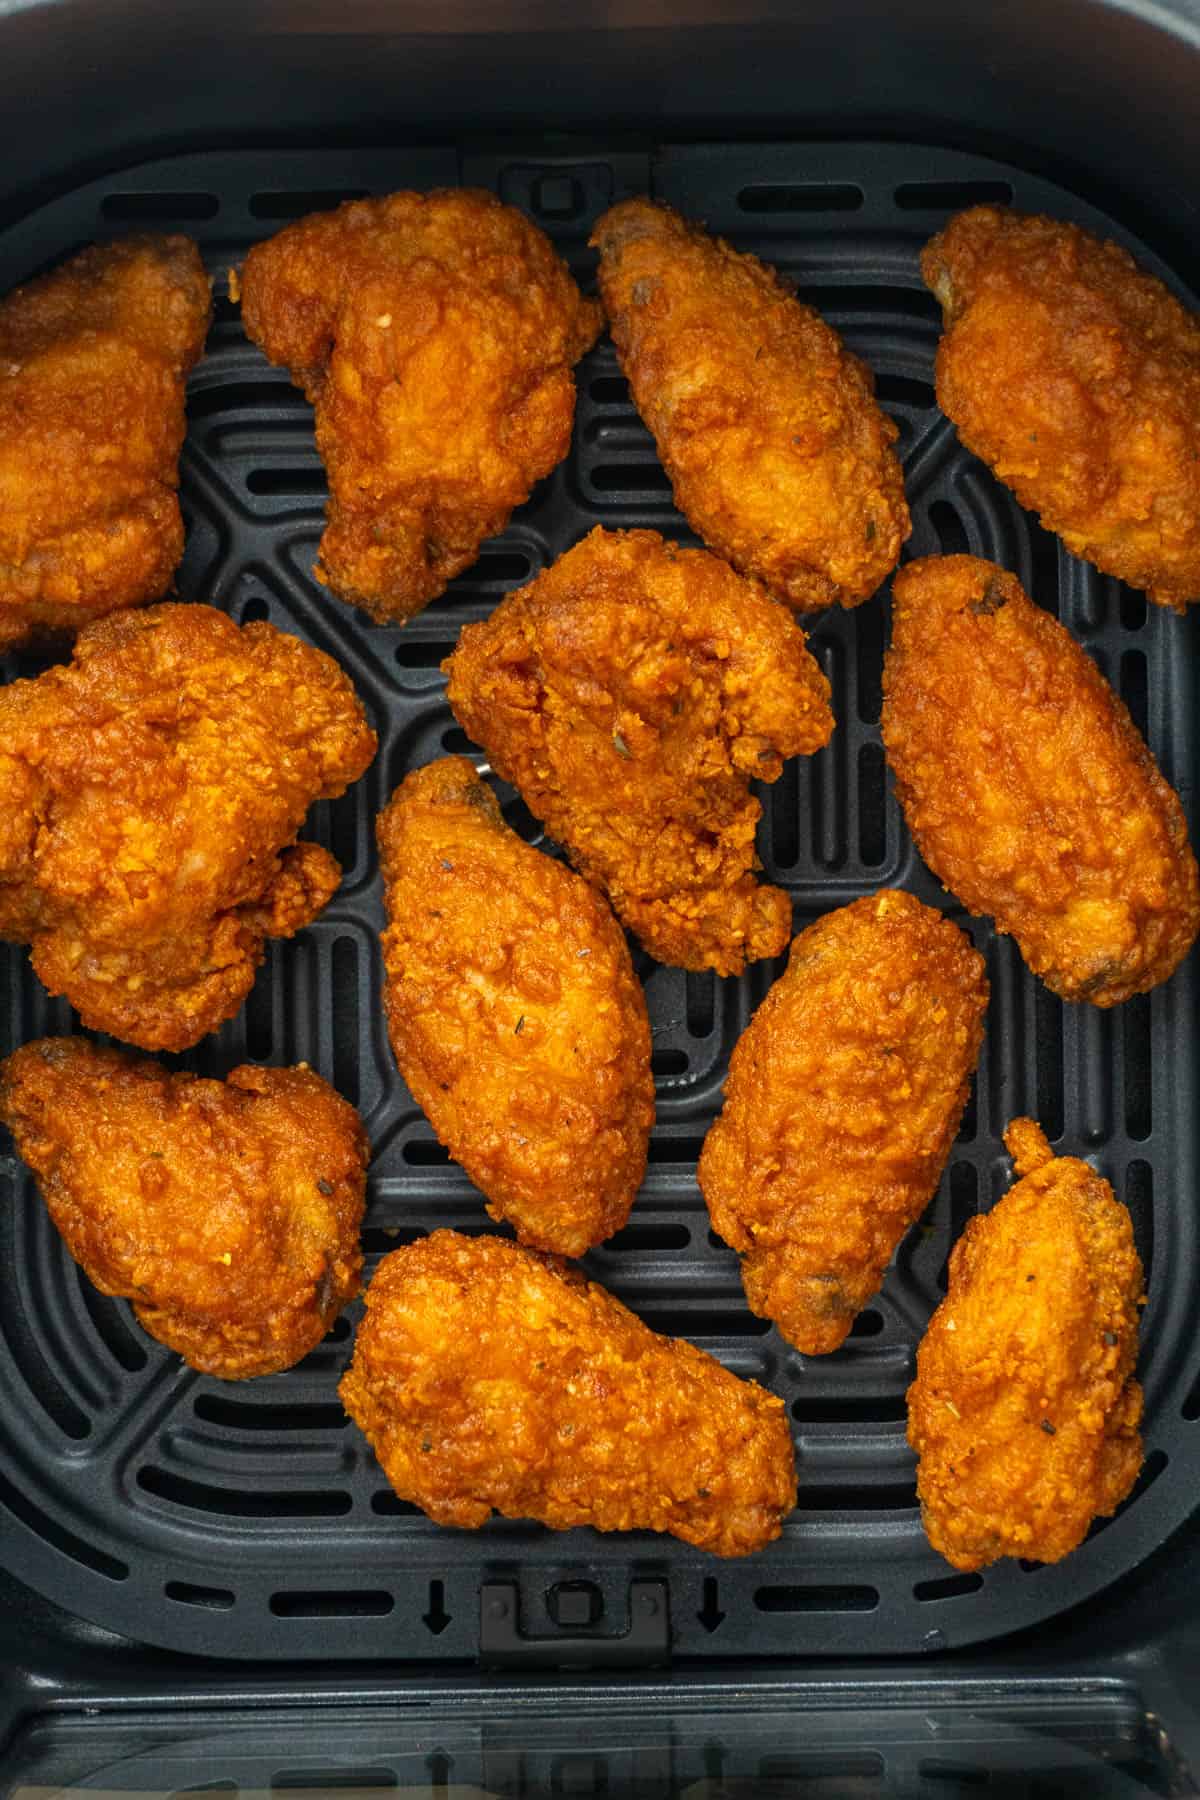 Close-up shot of the chicken wings in the air fryer basket.